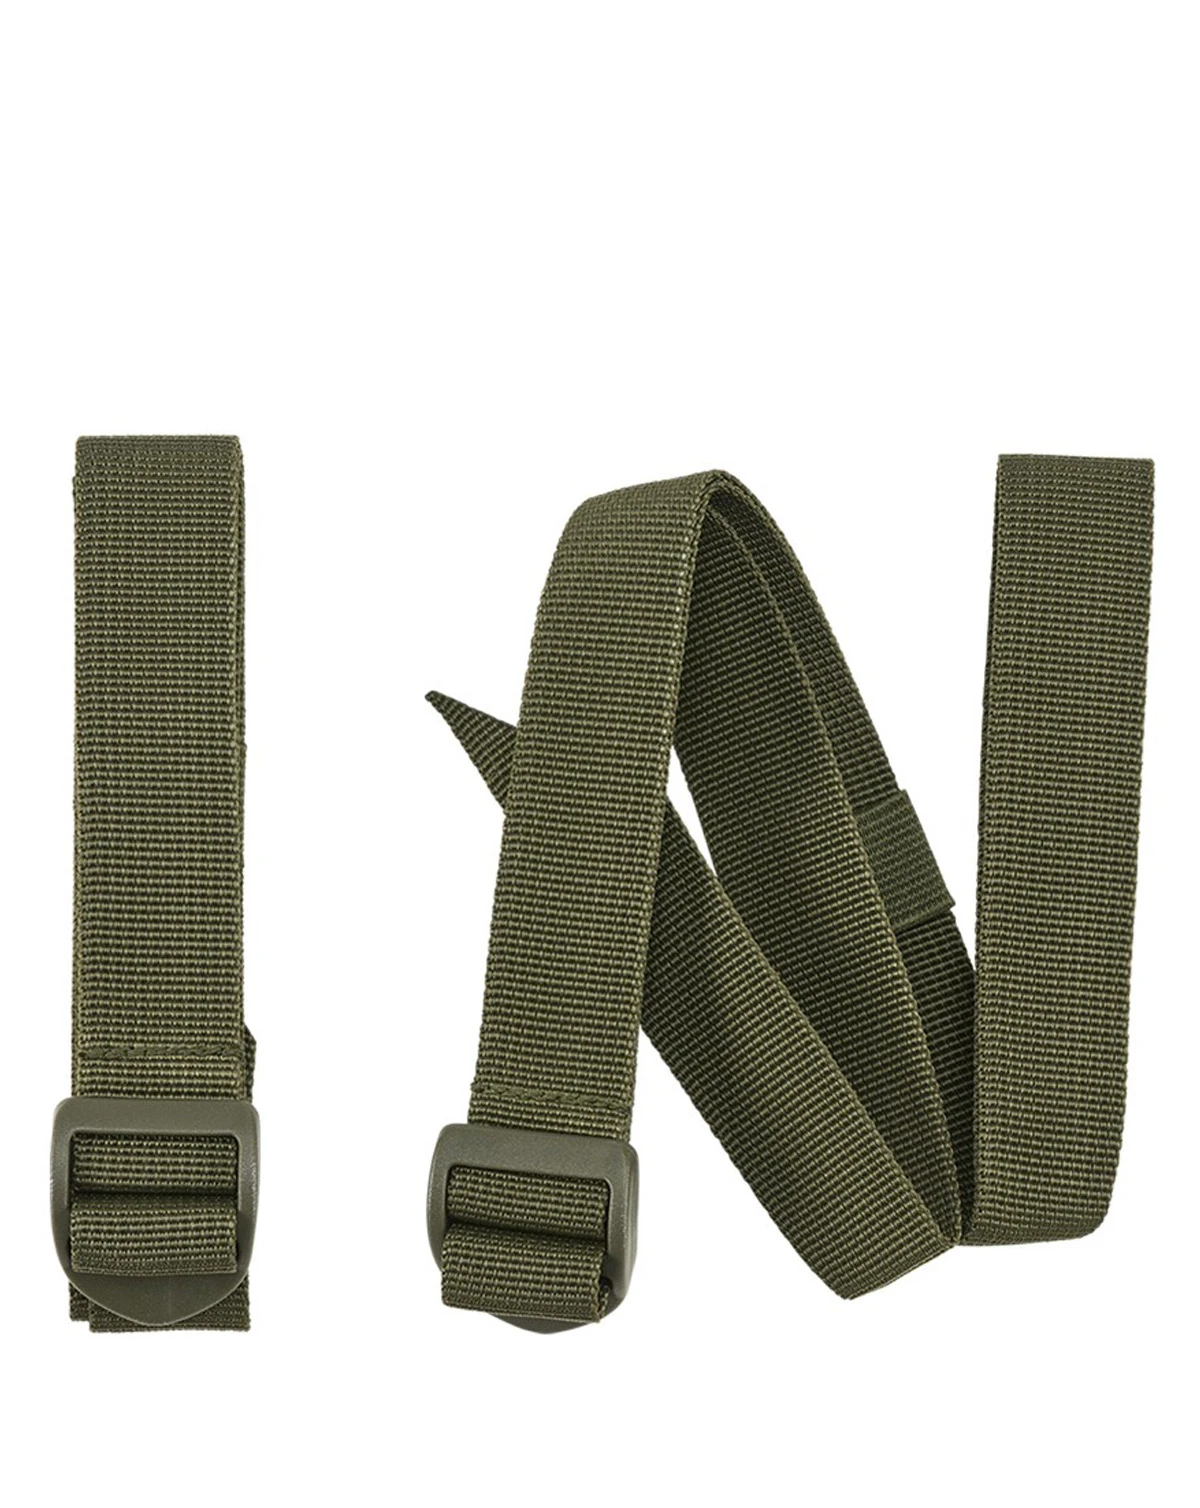 Buy Brandit Packing Straps | ARMY | Pack Guarantee 2 STAR Money 120 Back